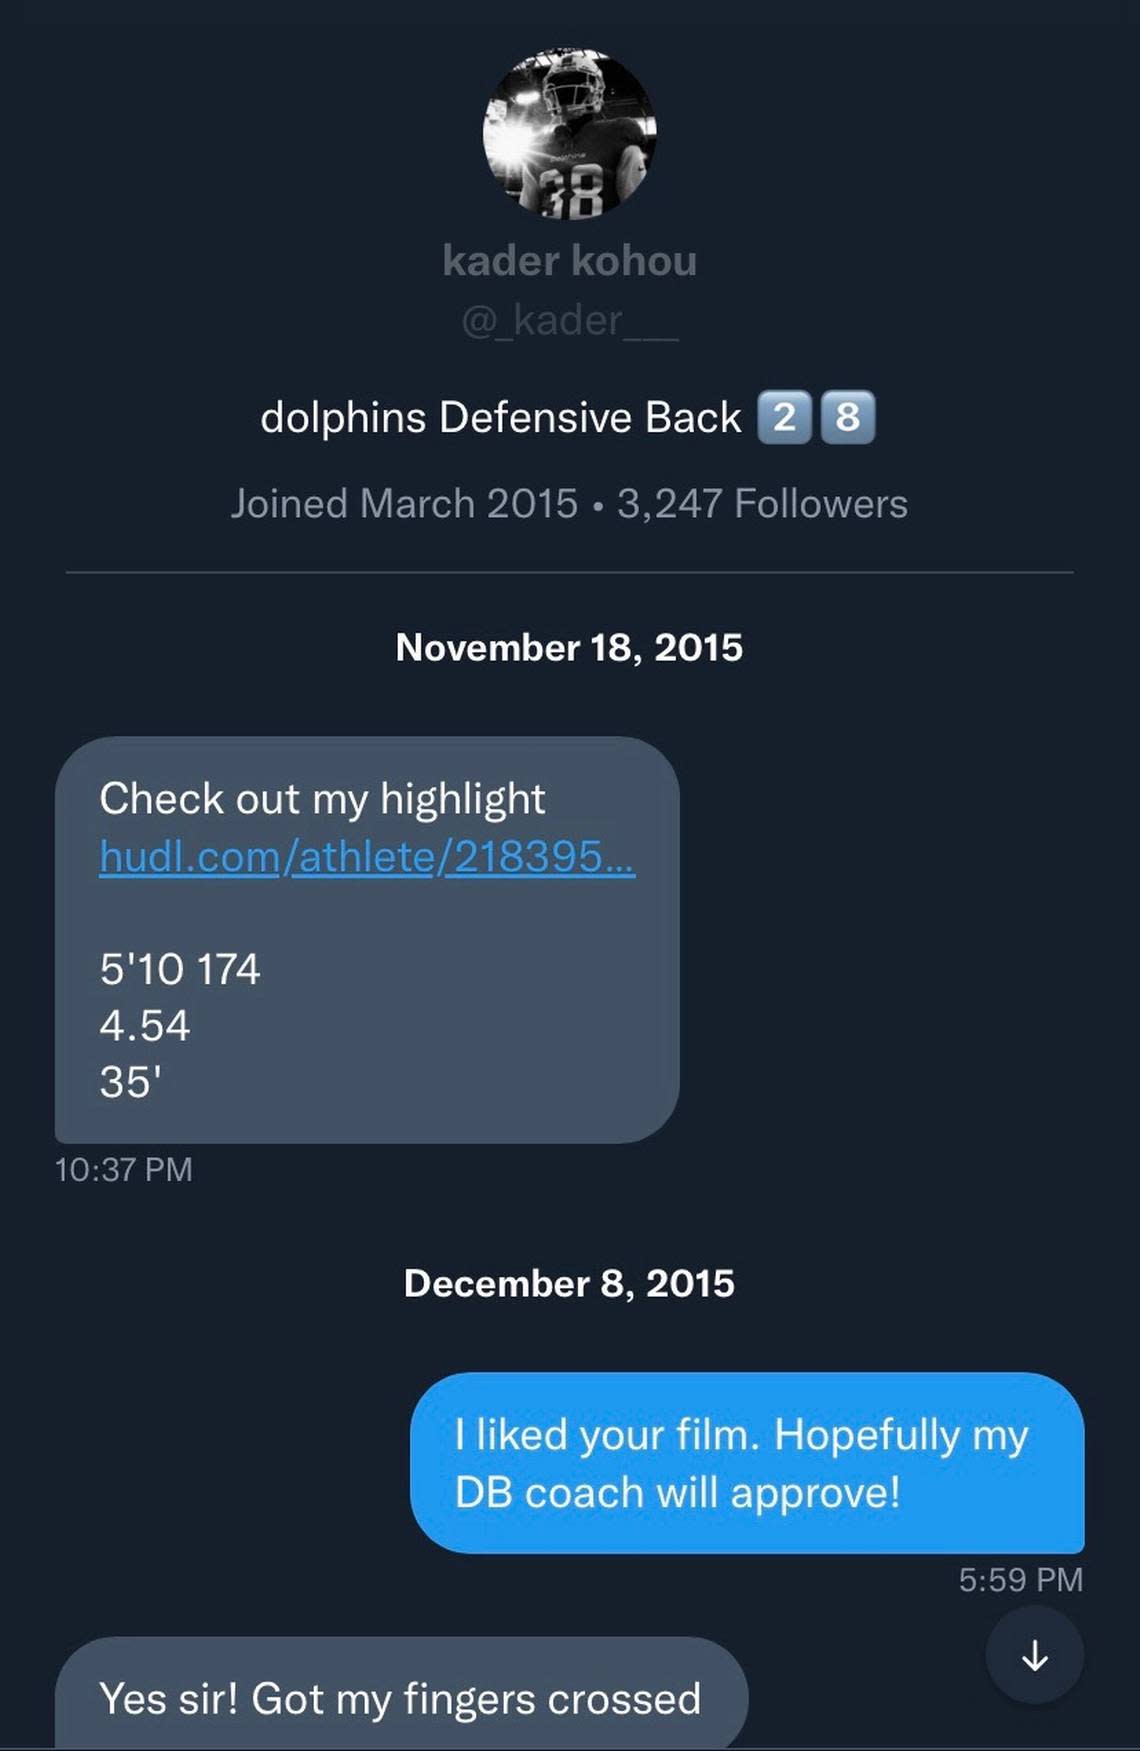 Direct message from Dolphins CB Kader Kohou to Caid Faske in 2015